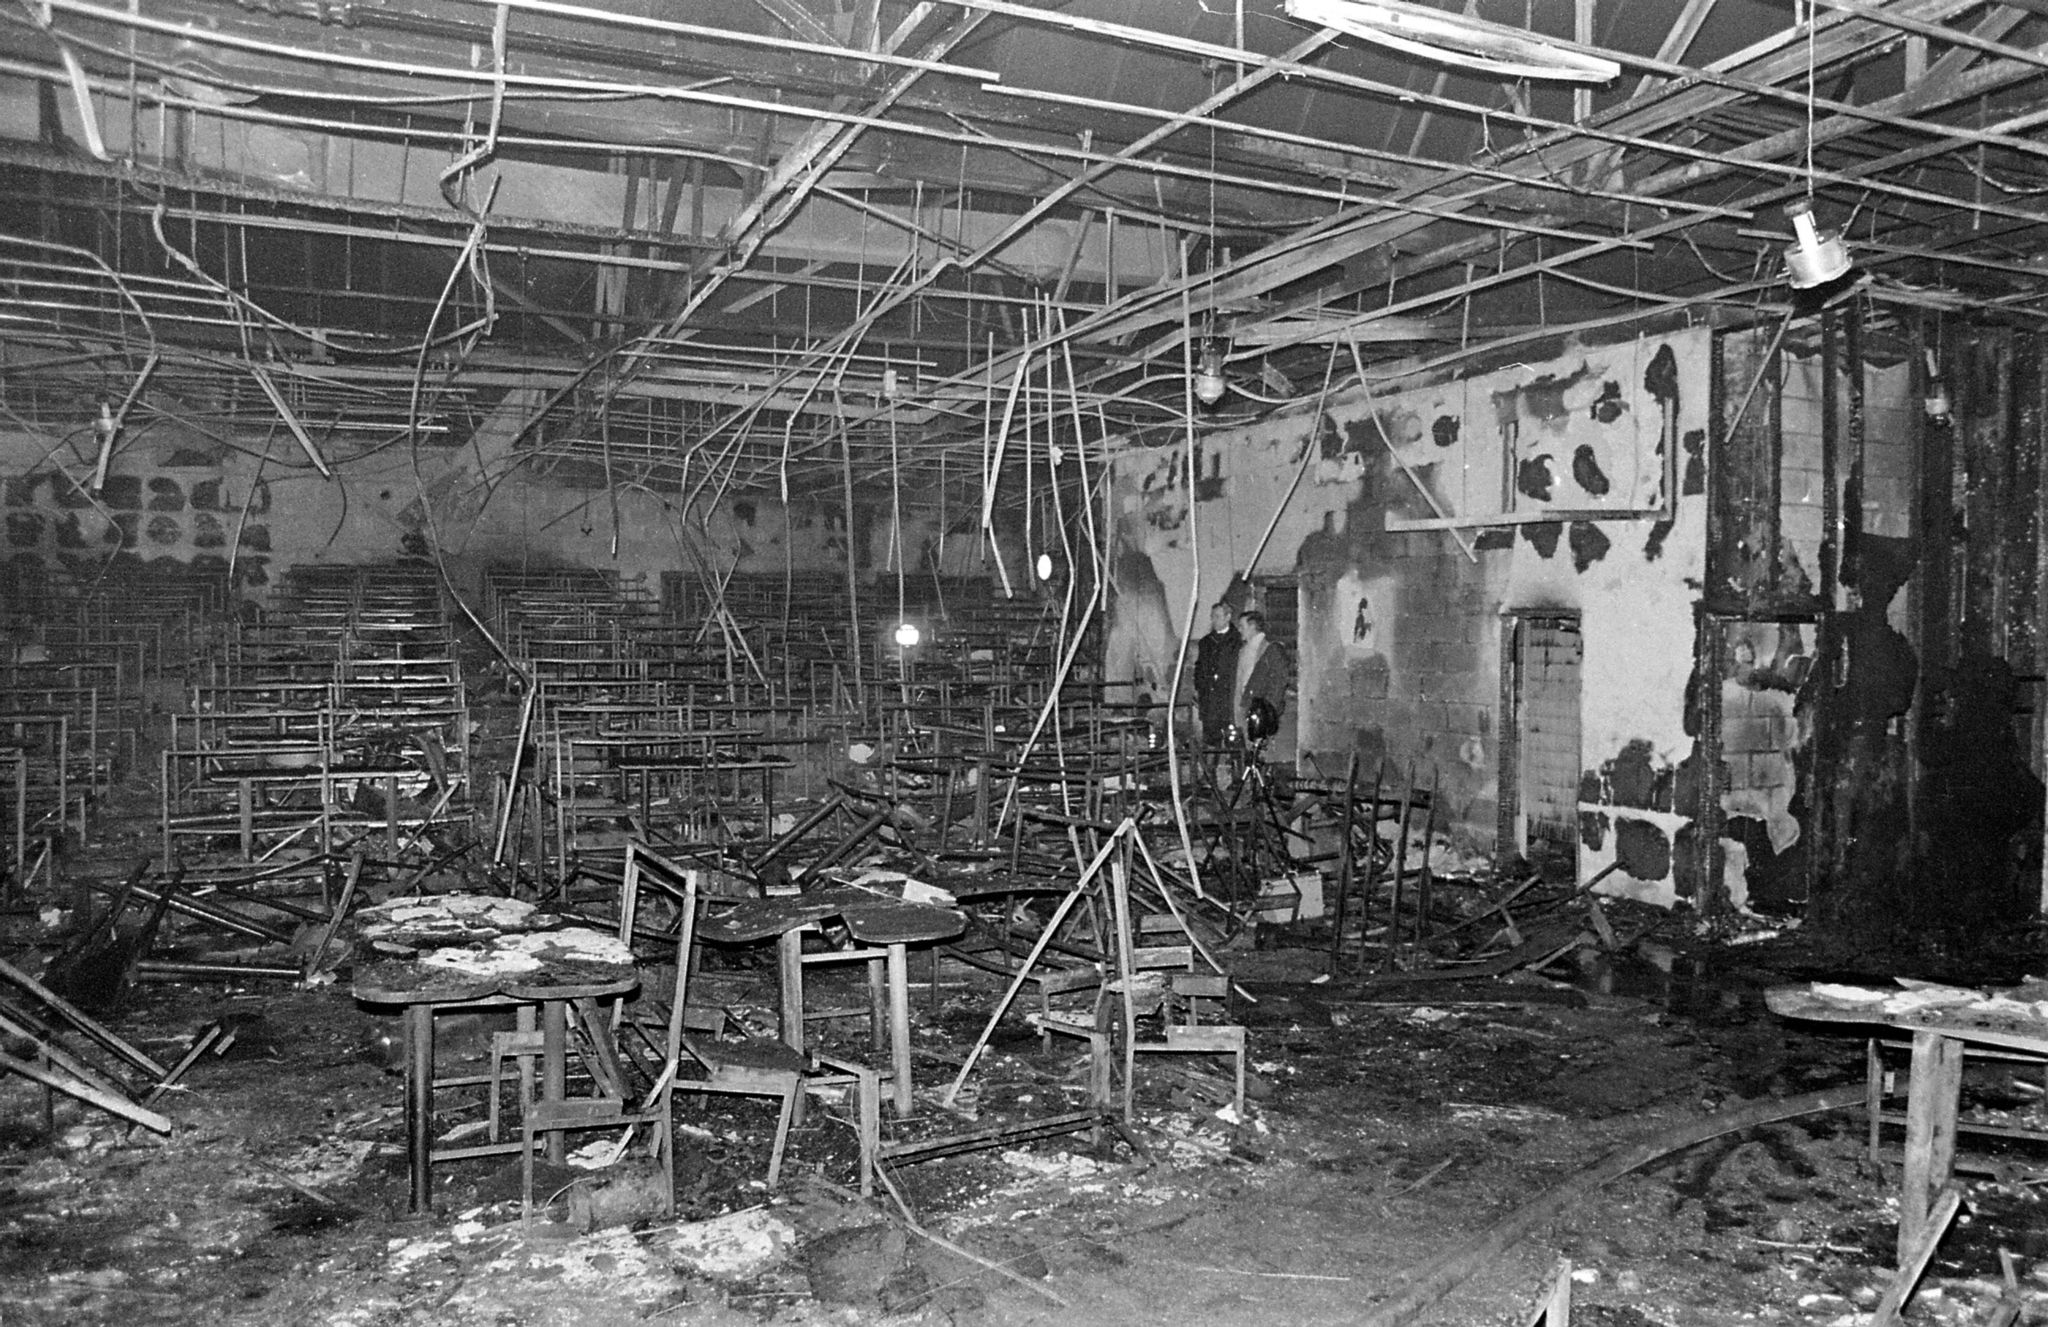 The Stardust nightclub in Artane which went on fire on the morning of the 14/2/1981, St. Valentines Day, killing 48